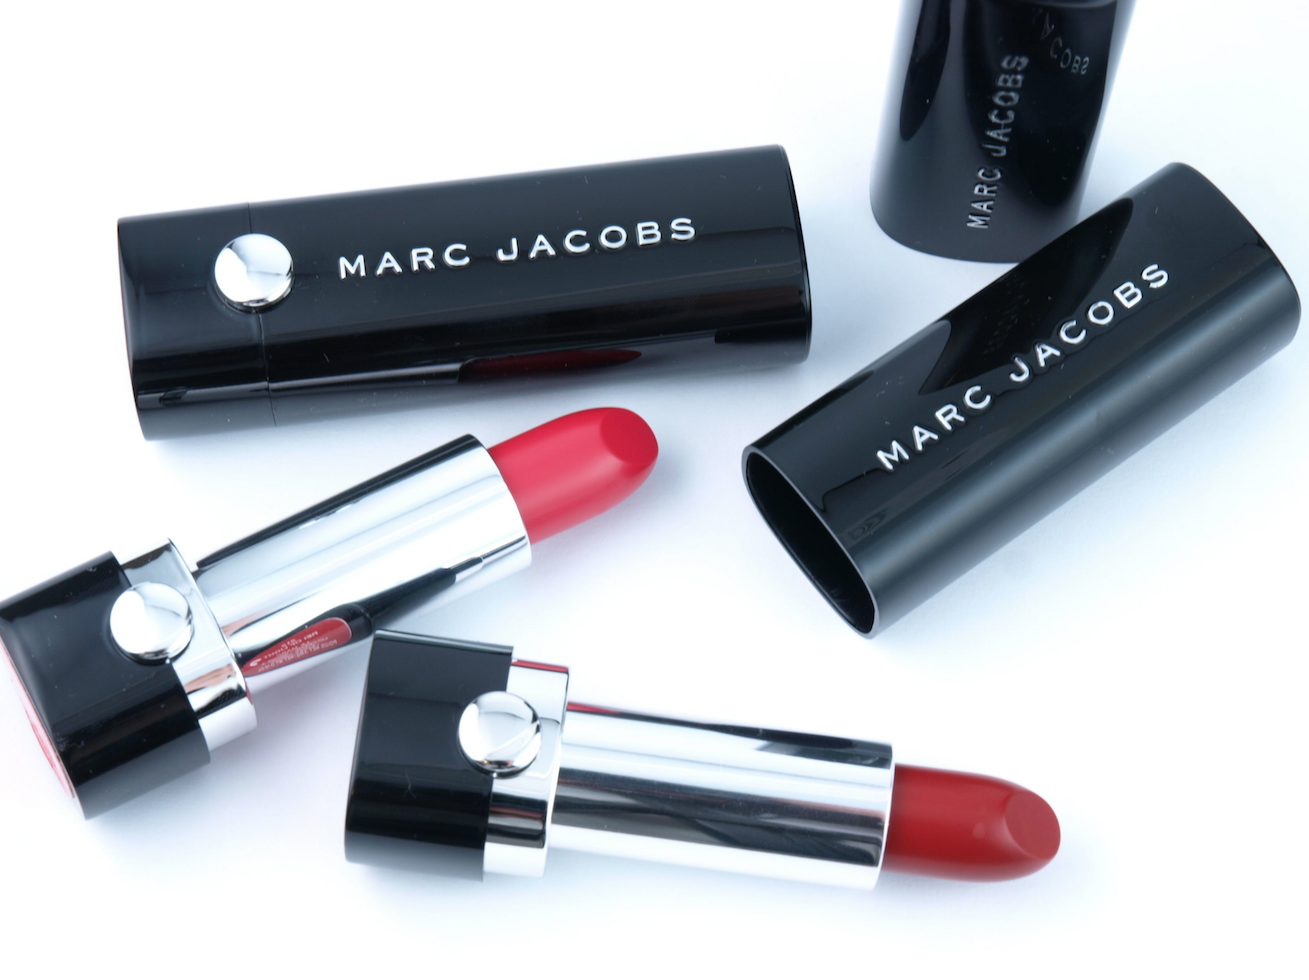 Marc Jacobs Le Marc Lip Creme Lipstick in "So Sofia", "Rei of Light" & "Je T'Aime": Review and Swatches